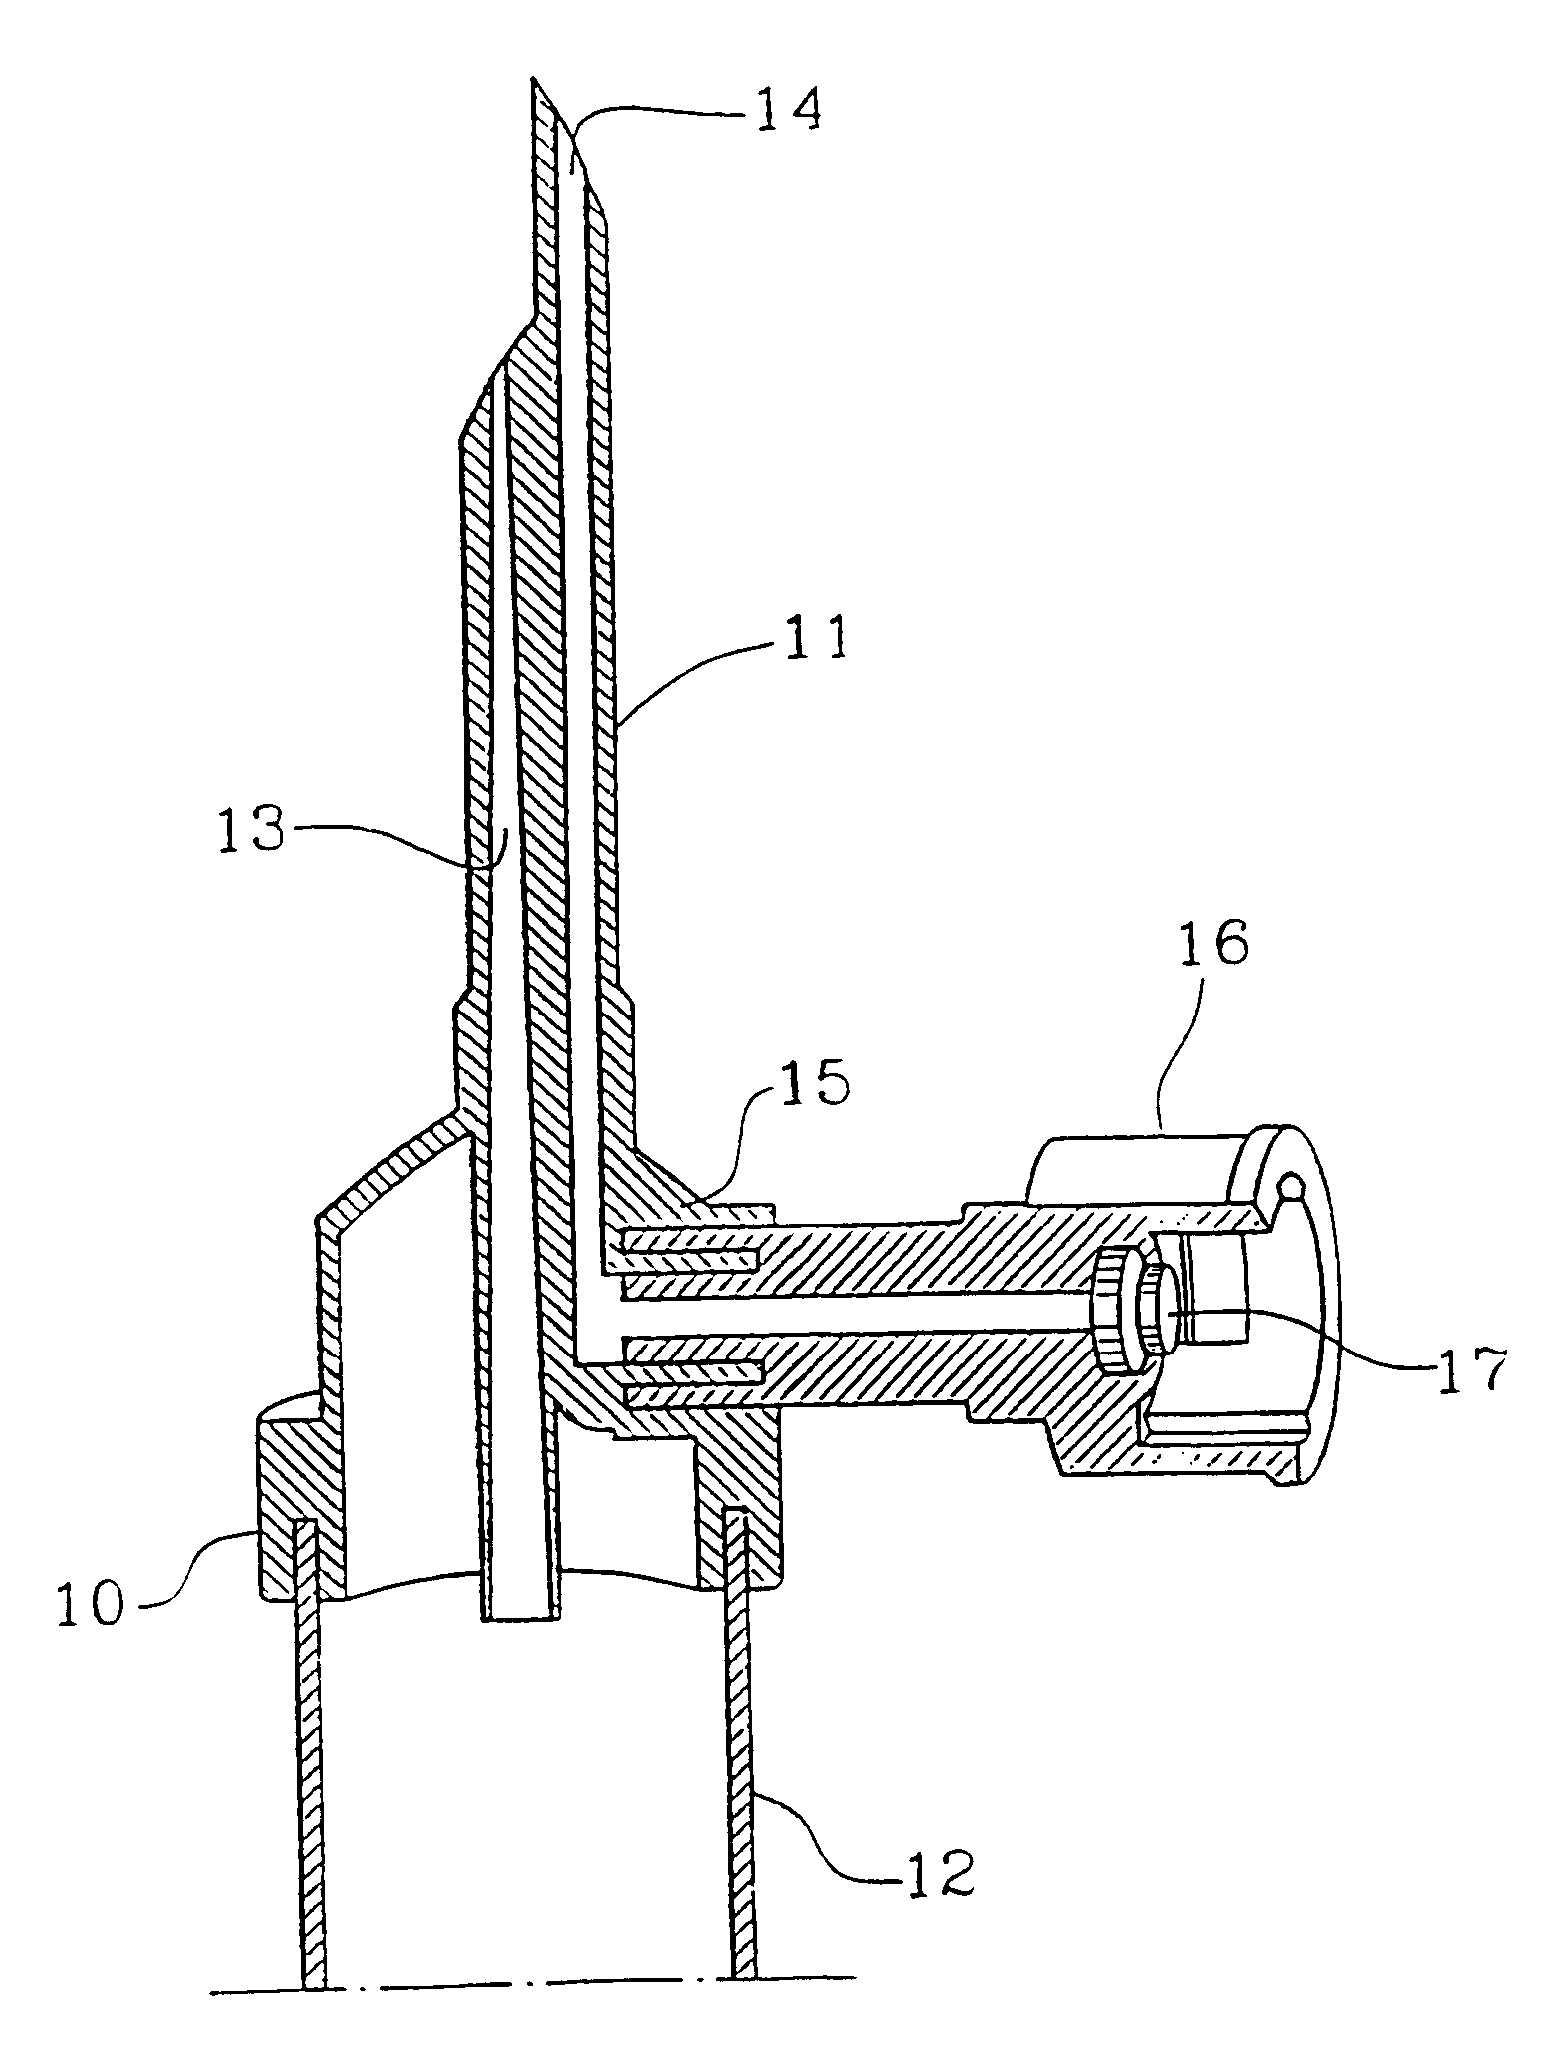 Apparatus for administrating toxic fluid